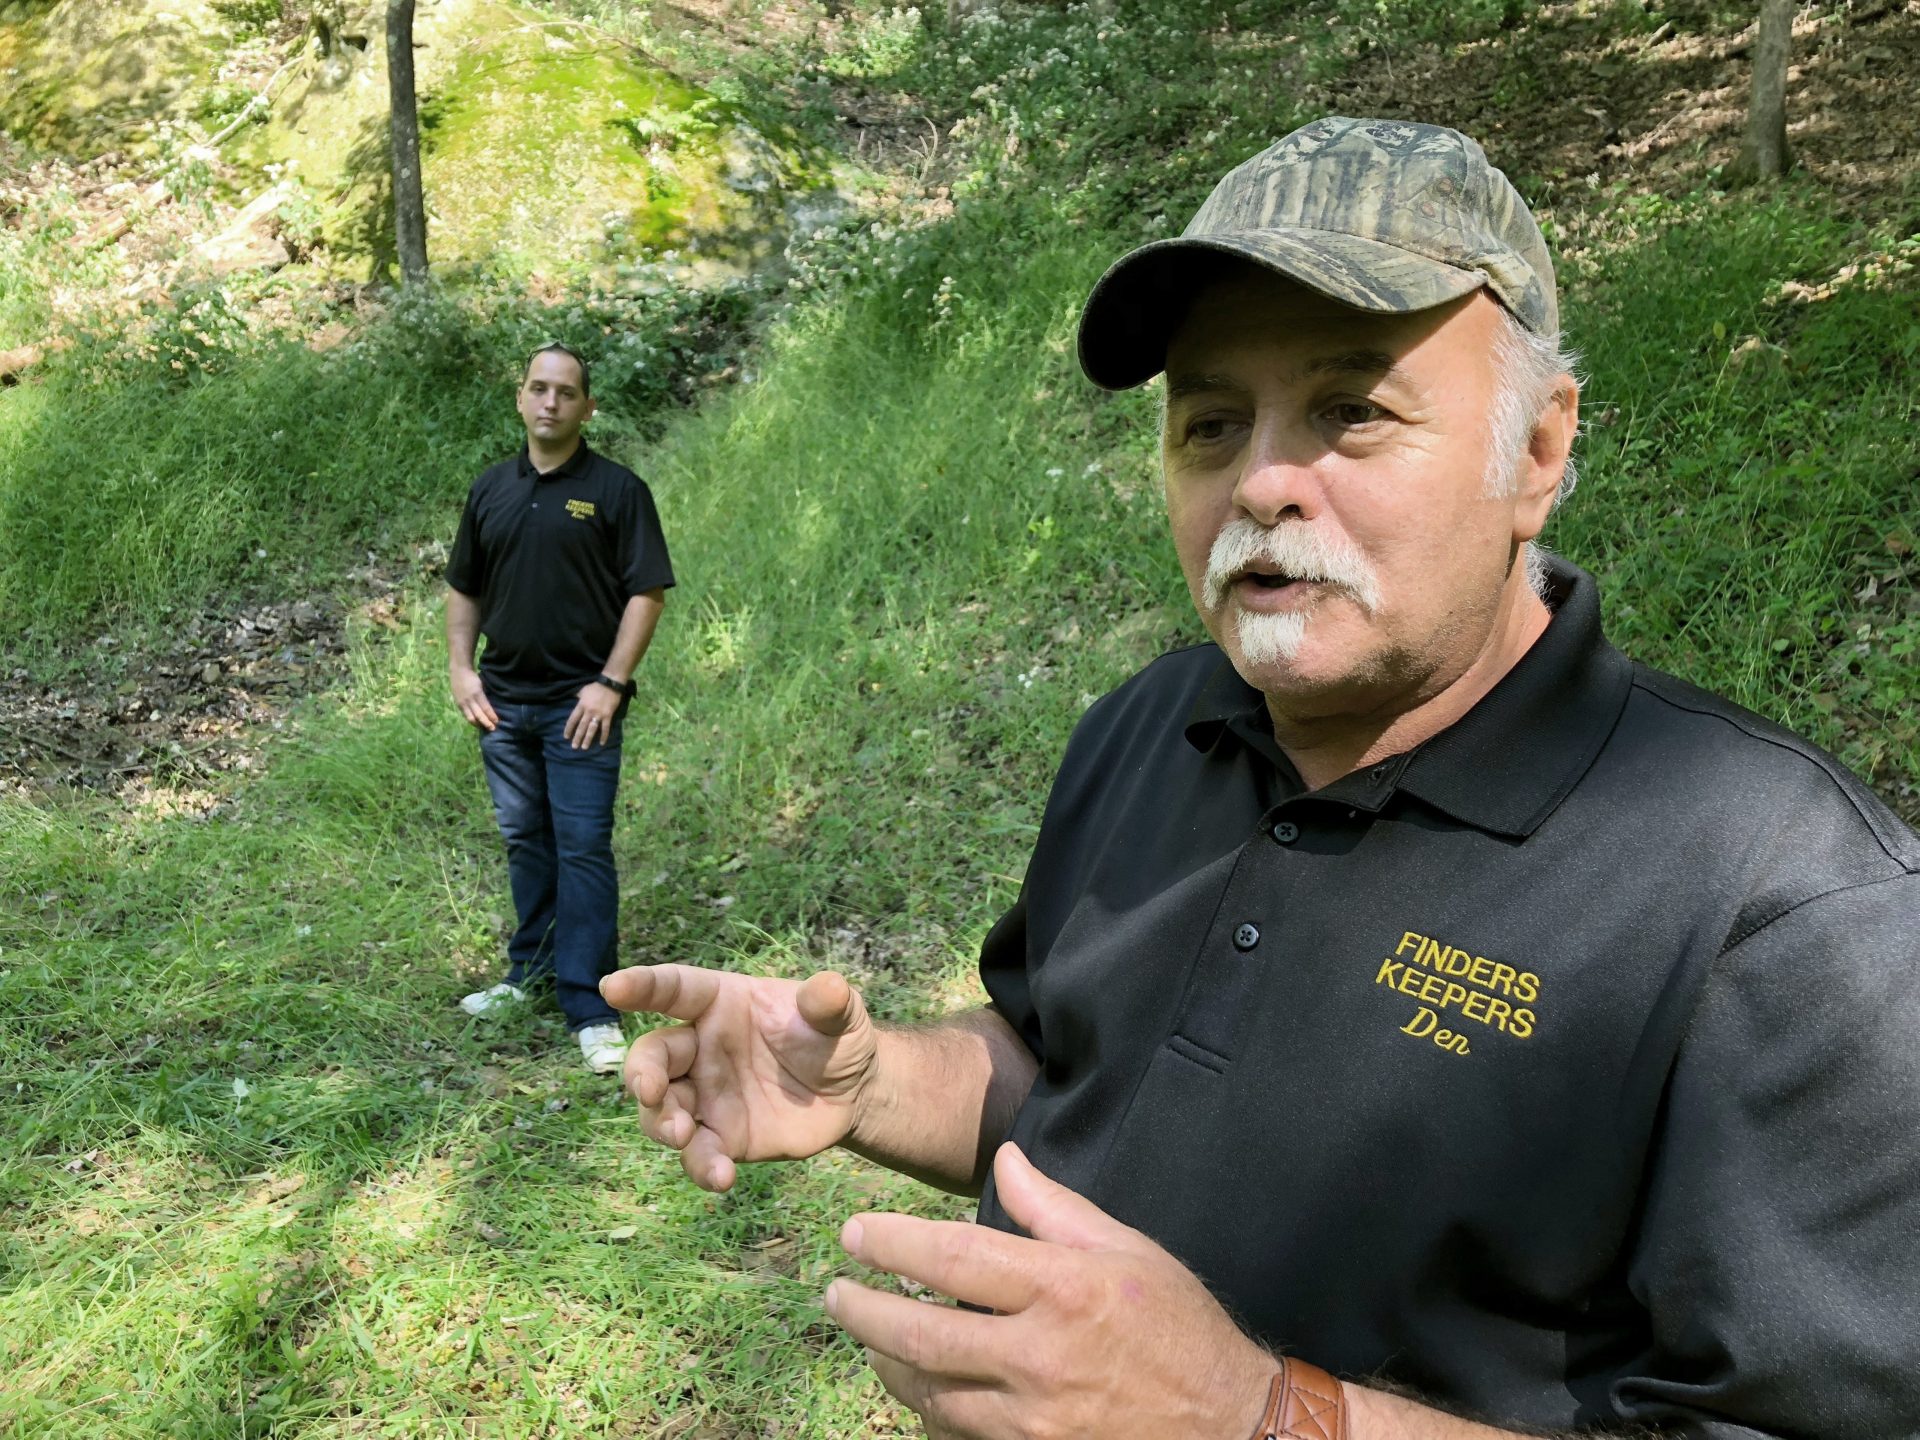 FILE PHOTO: This Sept. 20, 2018 file photo, Dennis Parada, right, and his son Kem Parada stand at the site of the FBI's dig for Civil War-era gold in Dents Run, Pennsylvania. Government emails released under court order show that FBI agents were looking for gold when they excavated Dent's Run in 2018, though the FBI says that nothing was found.